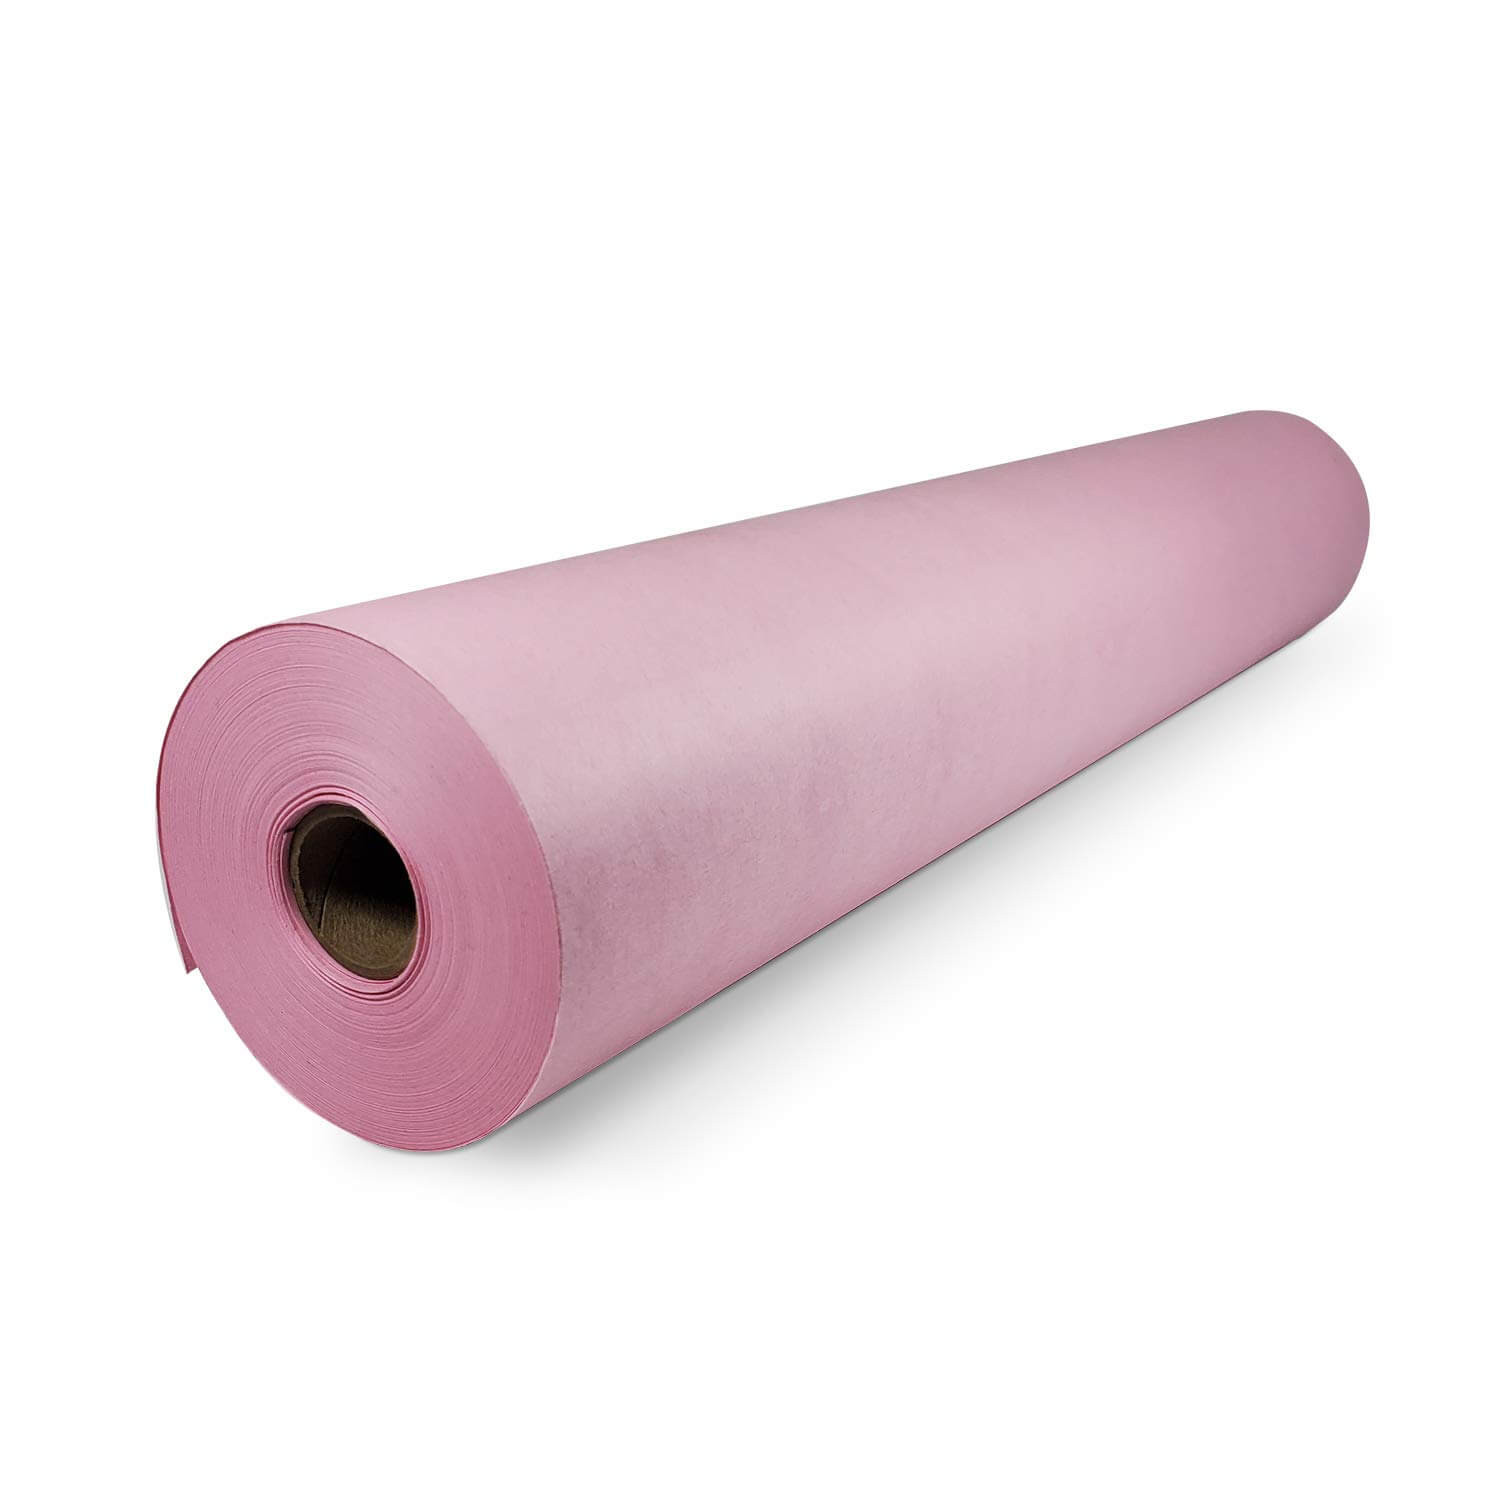  Pink Butcher Paper Roll - Case Pack of 12 Rolls - 18 Inch x 175  Feet (2100 Inch) - Food Grade Peach Wrapping Paper for Smoking Meat of all  Varieties : Industrial & Scientific